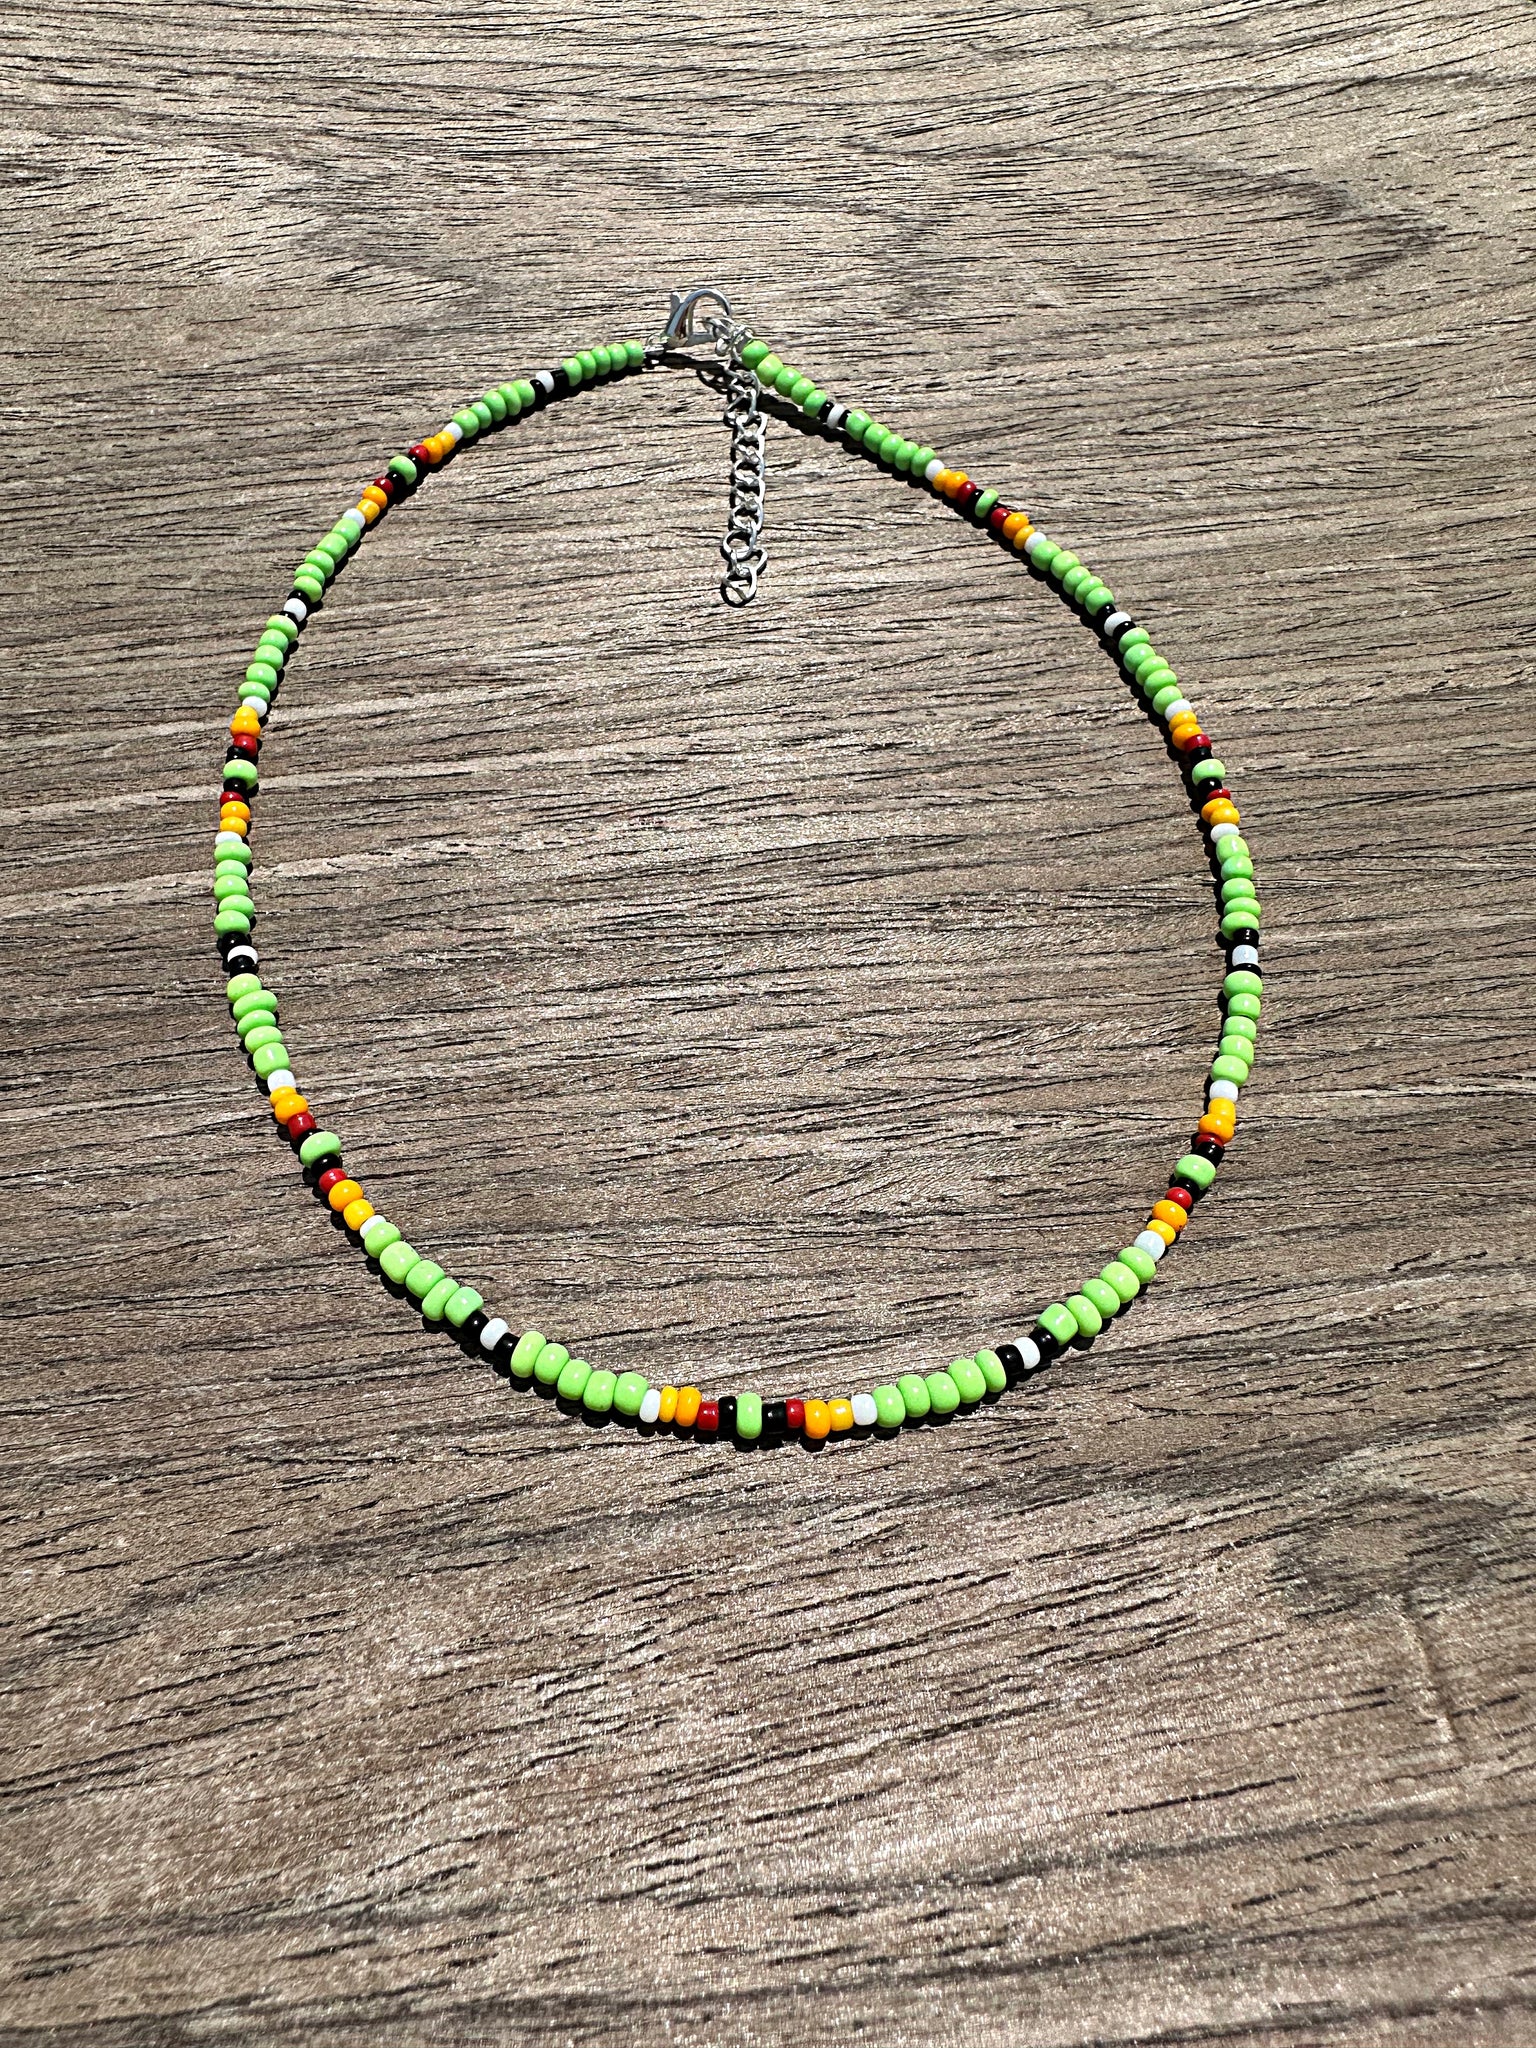 Western Trails Choker Seed Bead Necklace - Etsy